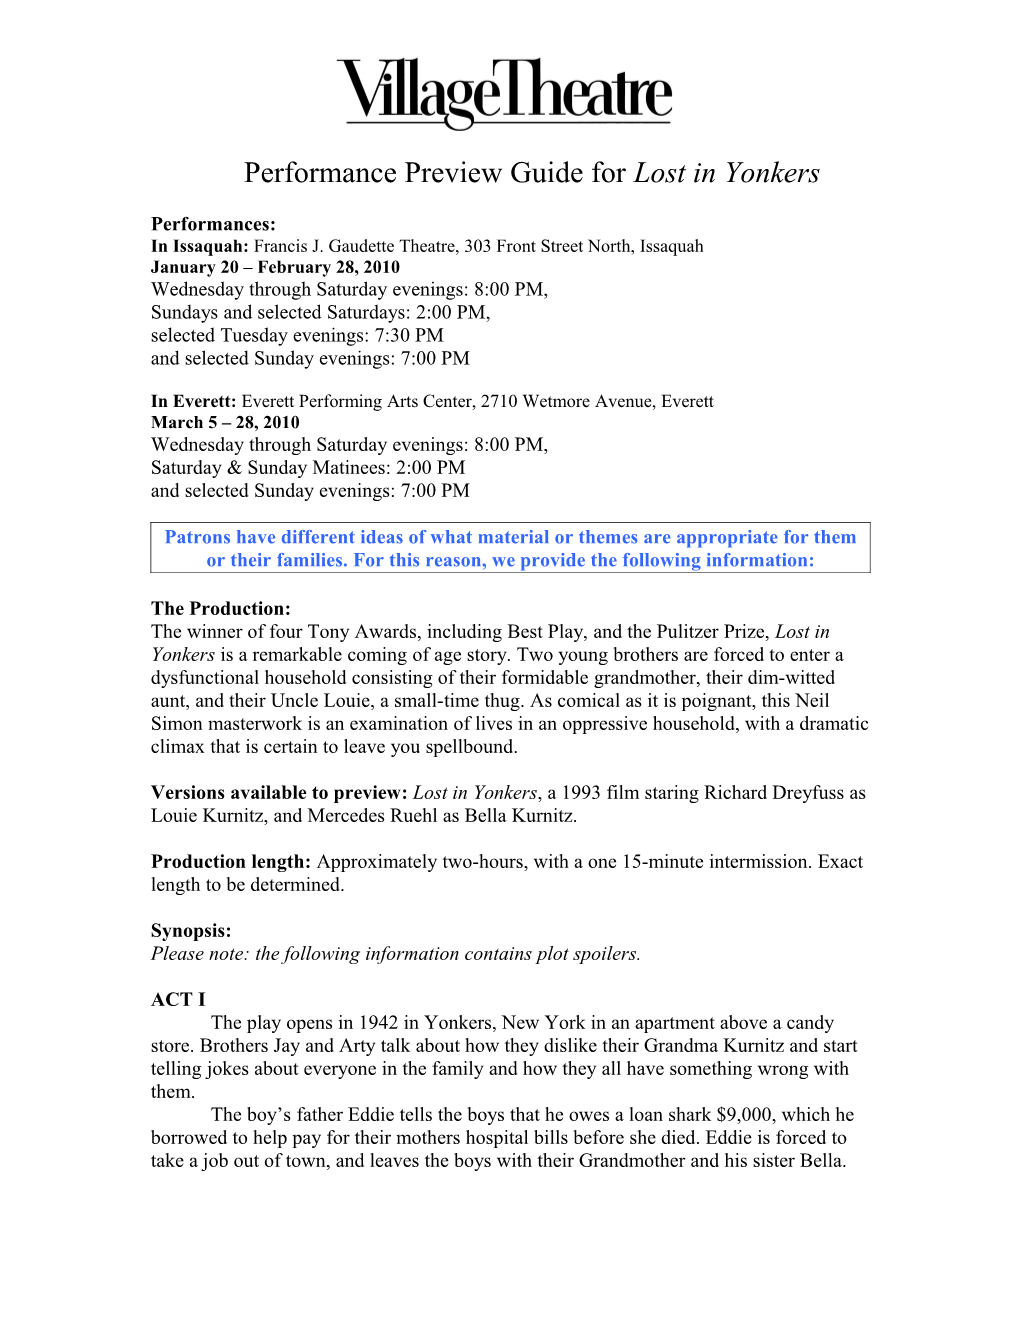 Performance Preview Guide for Lost in Yonkers